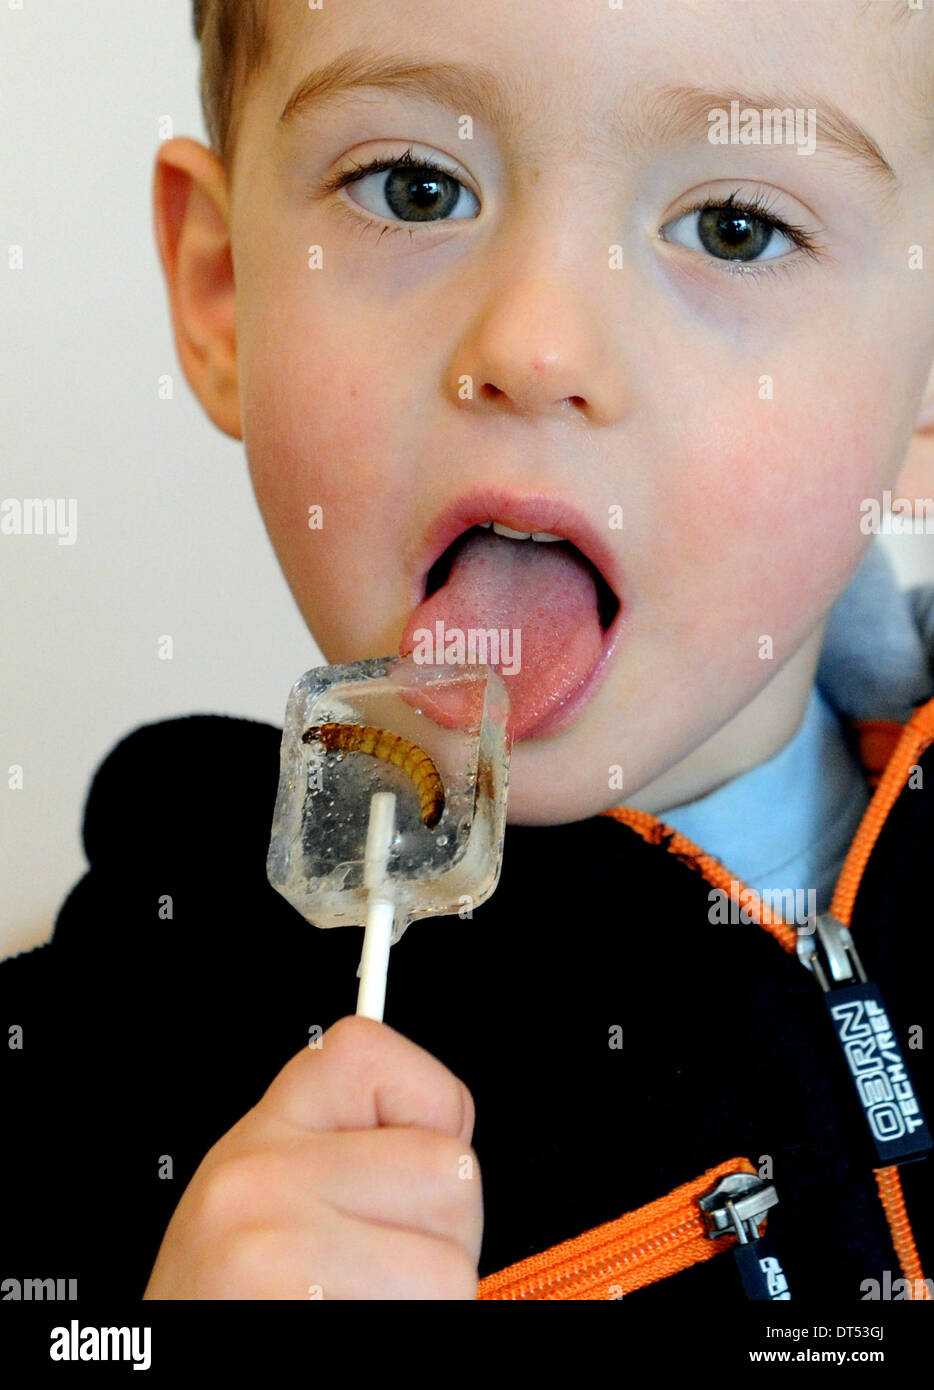 Aukrug, Germany. 25th Jan, 2014. Three year old Tibo tries a lollipop with a Zophobas (larvae of giant black beetles) and meal worms sit on a table ready to be eaten in Aukrug, Germany, 25 January 2014. 43 year Stefan Krauss has run an internet store for edible insects. Photo: CARSTEN REHDER/dpa/Alamy Live News Stock Photo